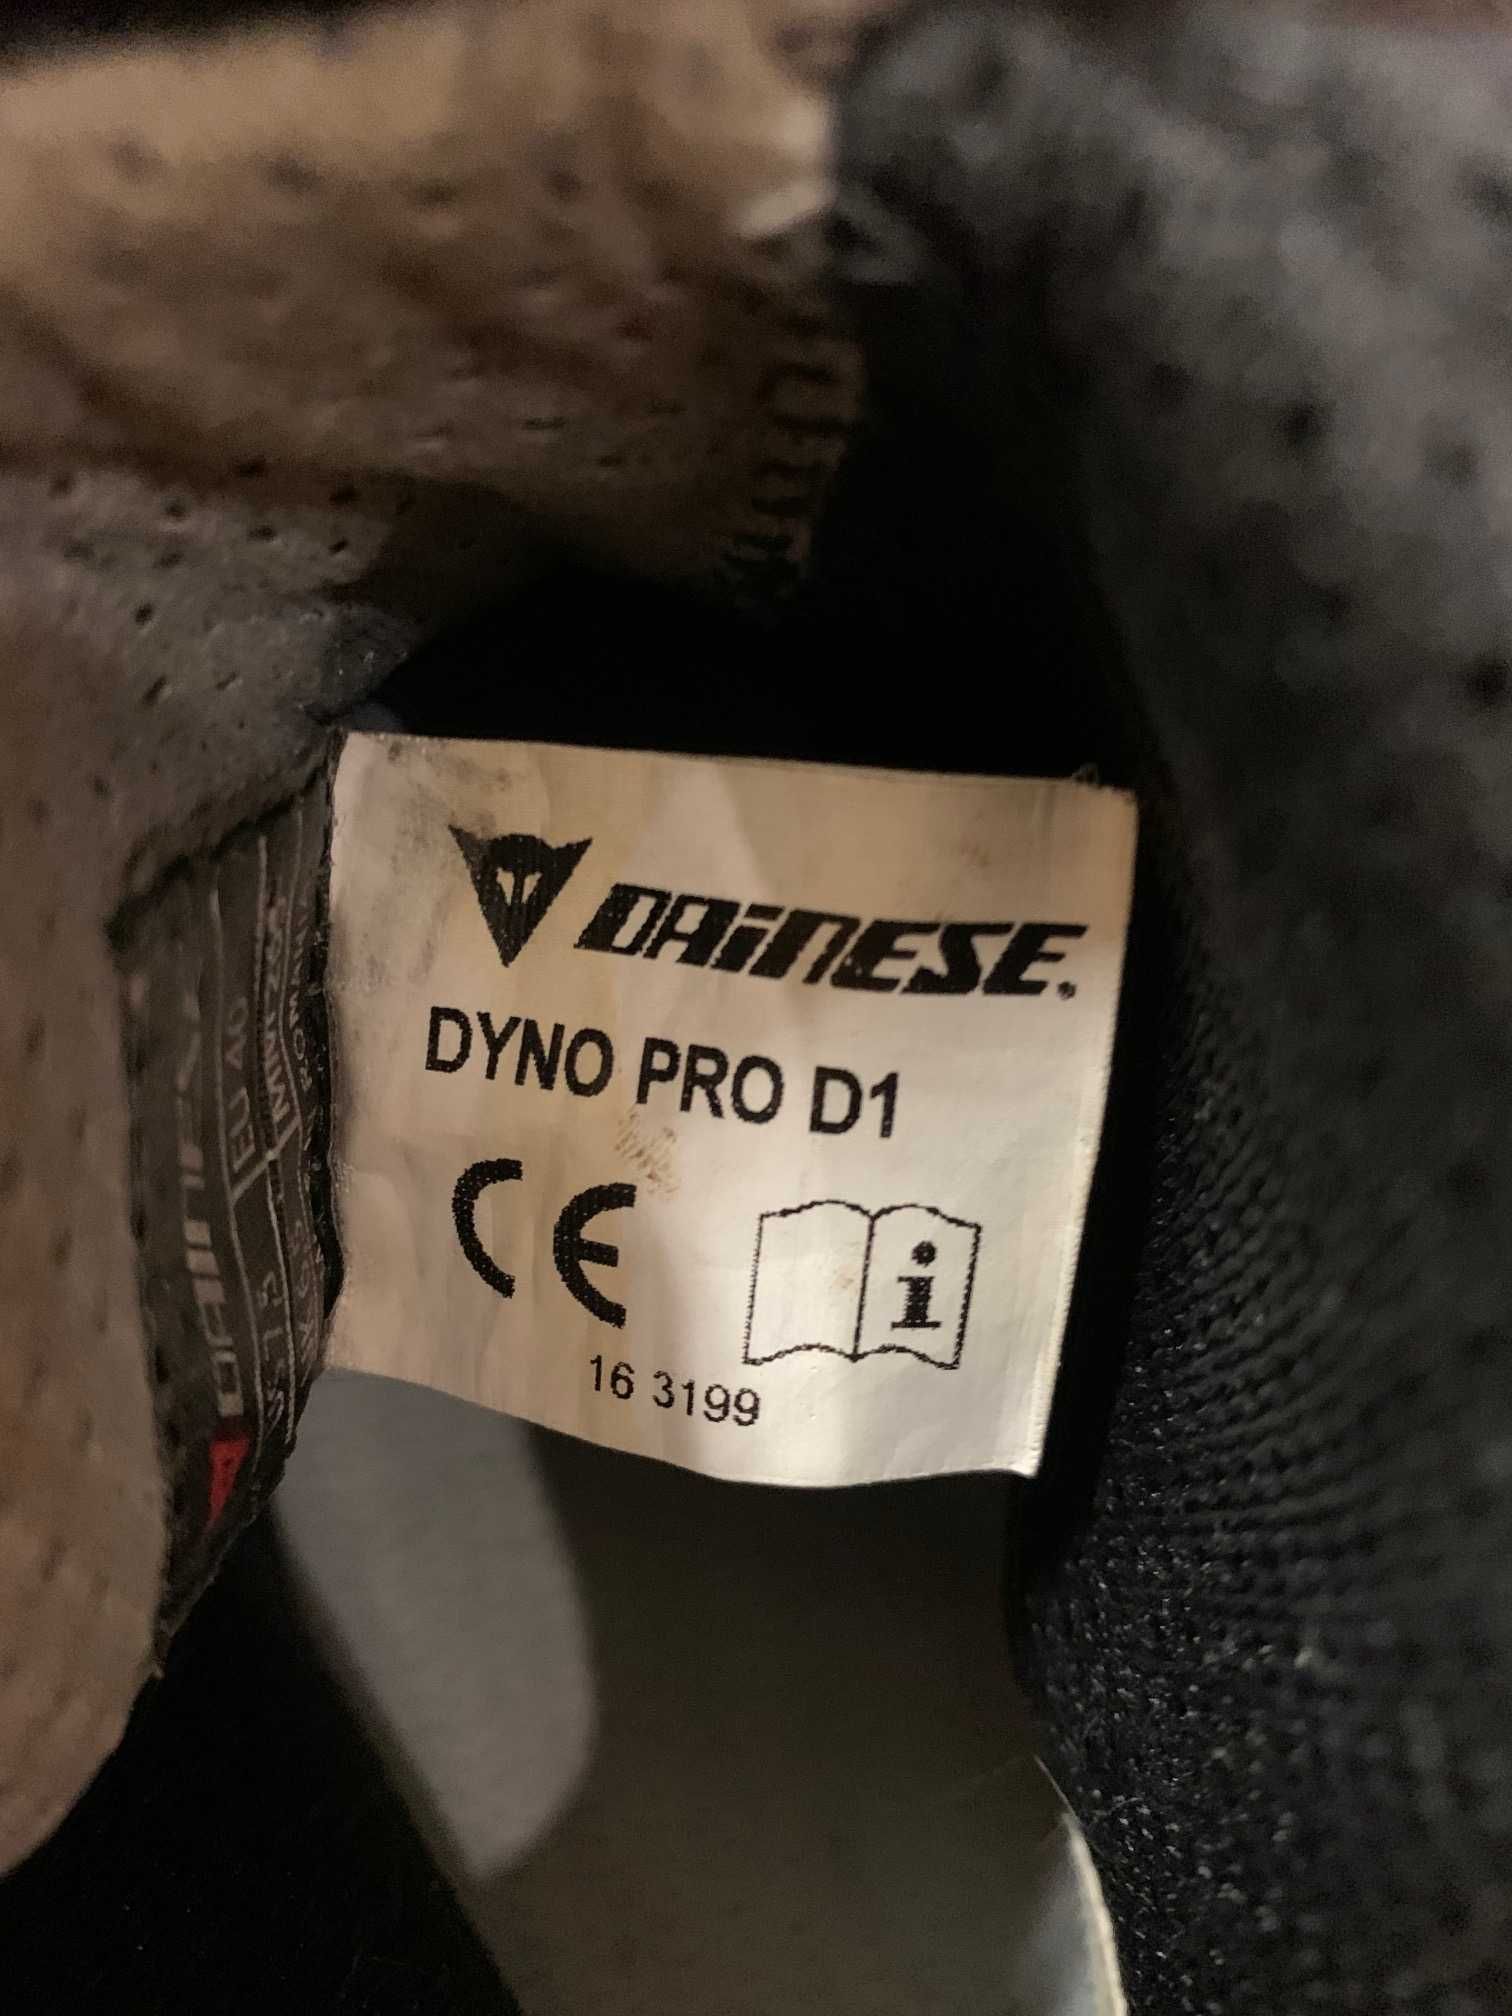 Dainese Dyno Pro D1